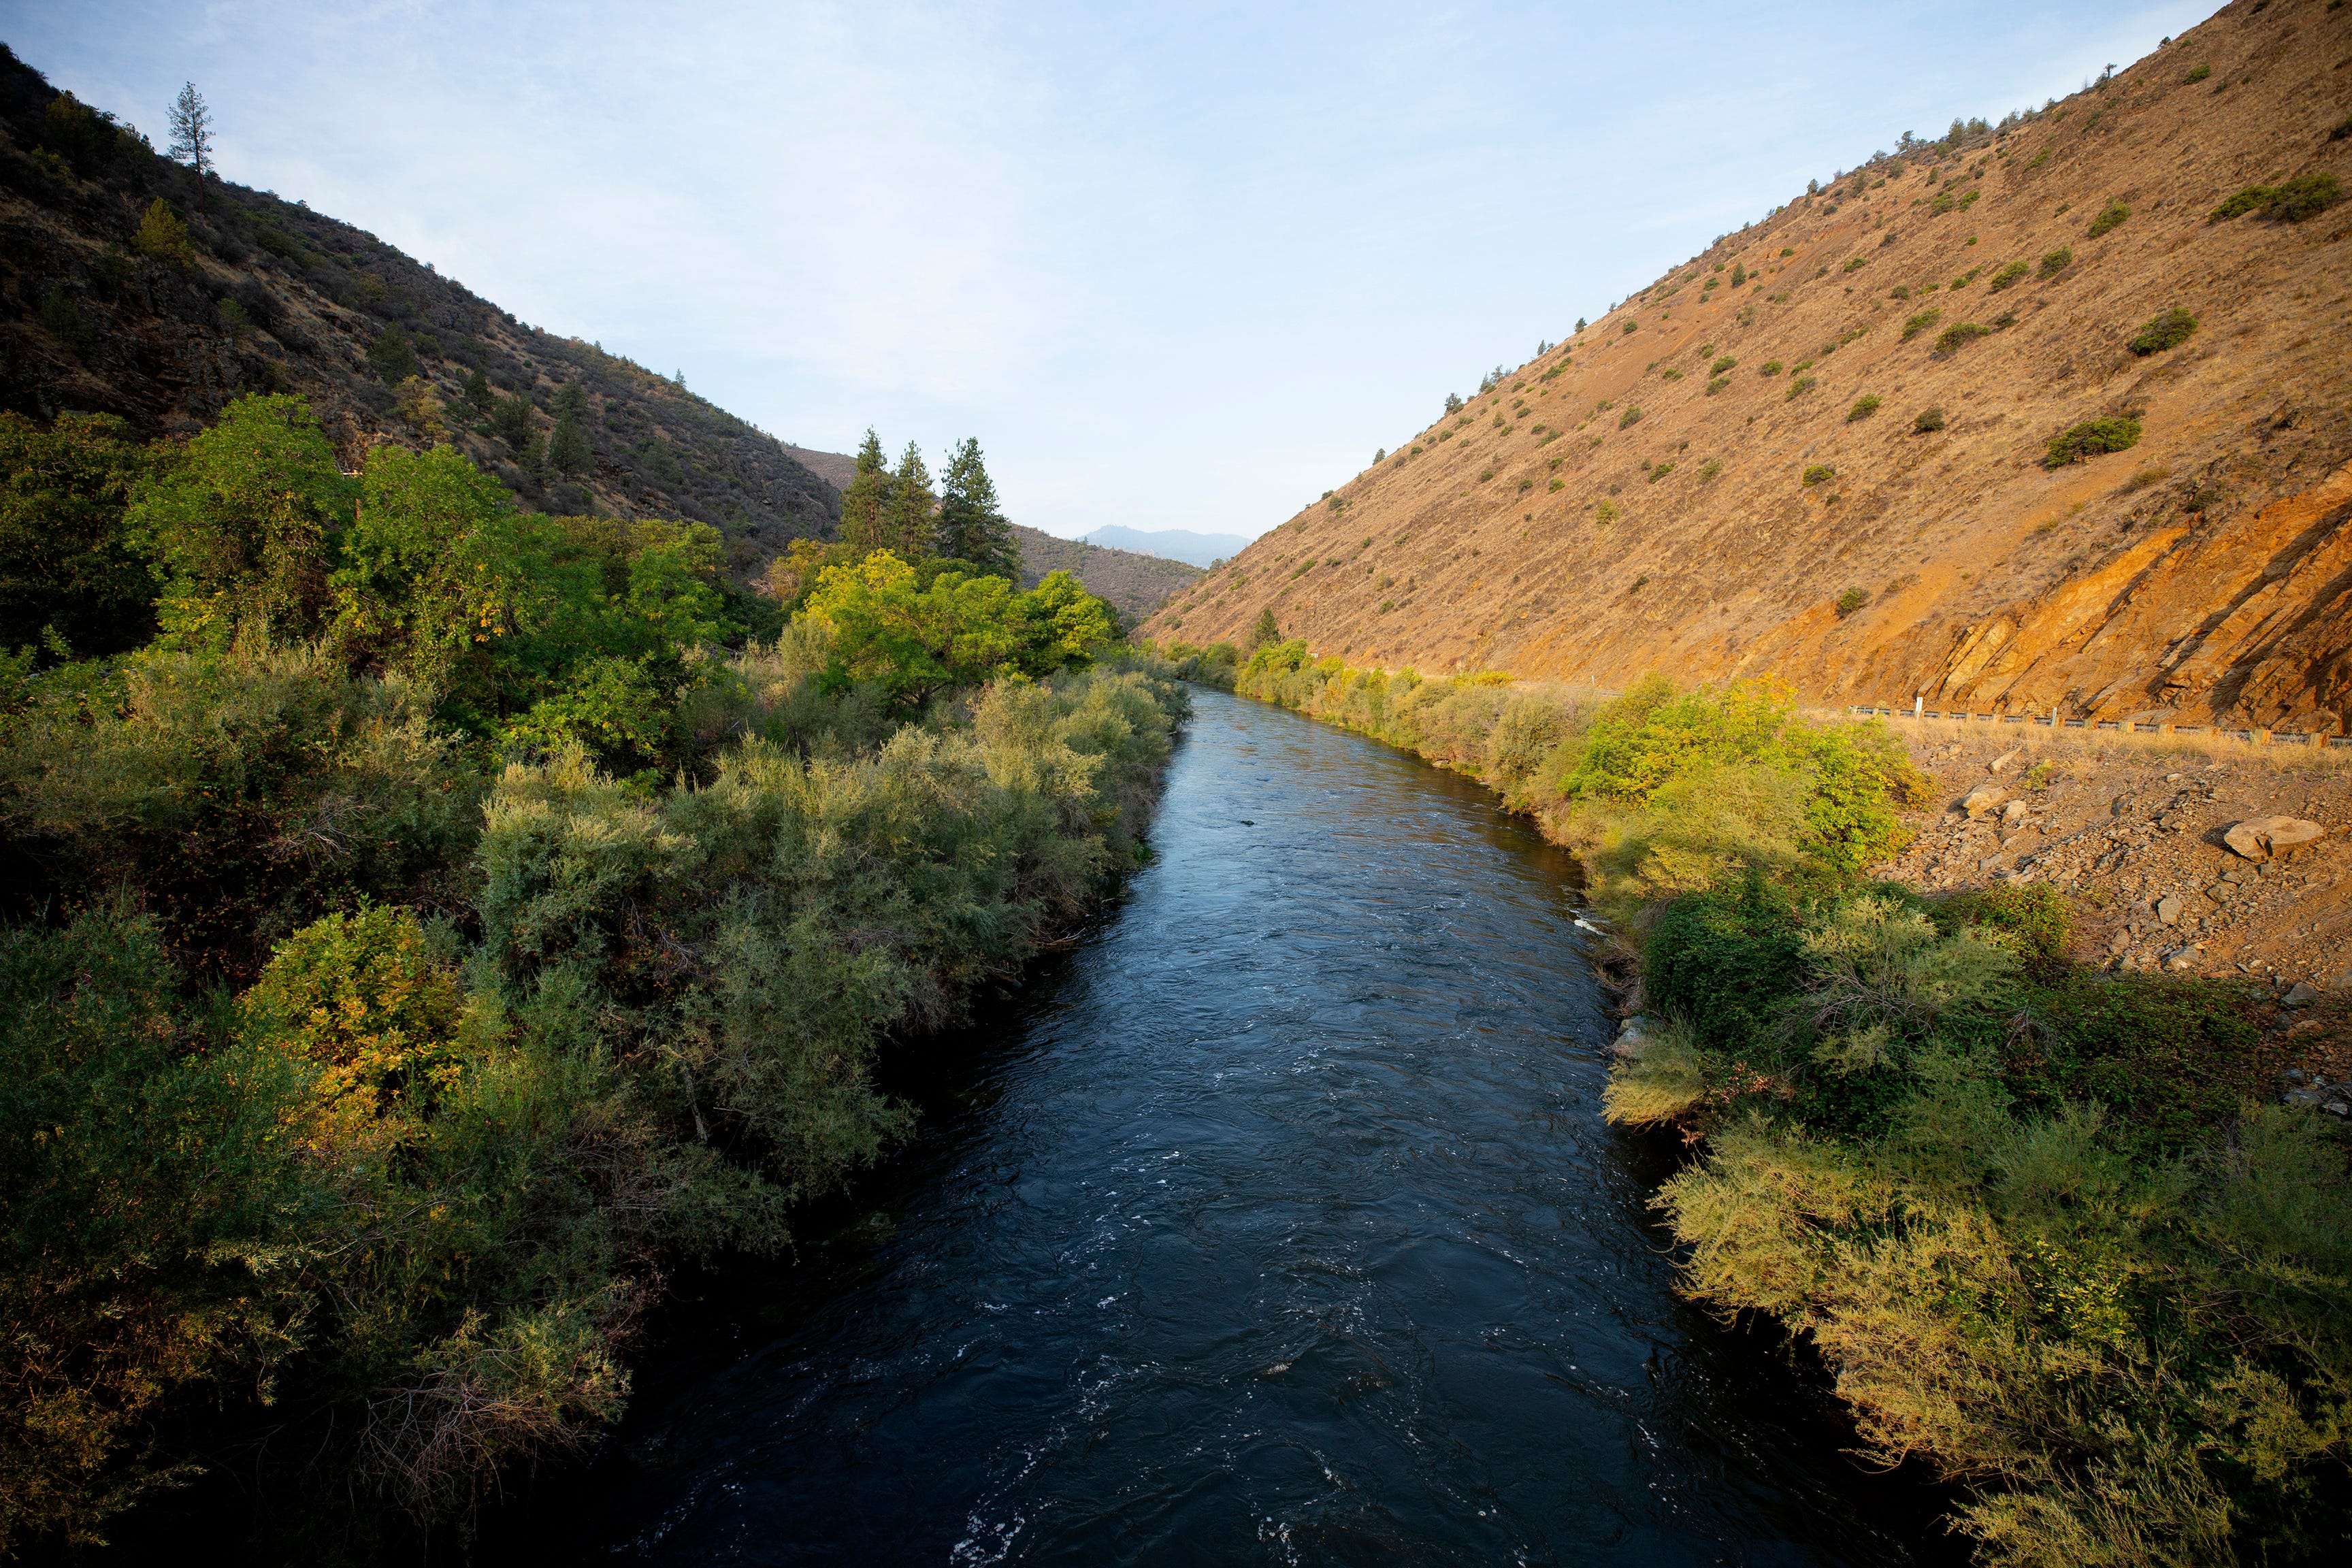 The Klamath River runs through Oregon and California. Many Indigenous people depend on salmon as a food source. The aftermath of fires and rains creates sediment in the rivers. It is this sediment that prevents the salmon eggs from getting the oxygen they need, affecting the salmon run in years to come.